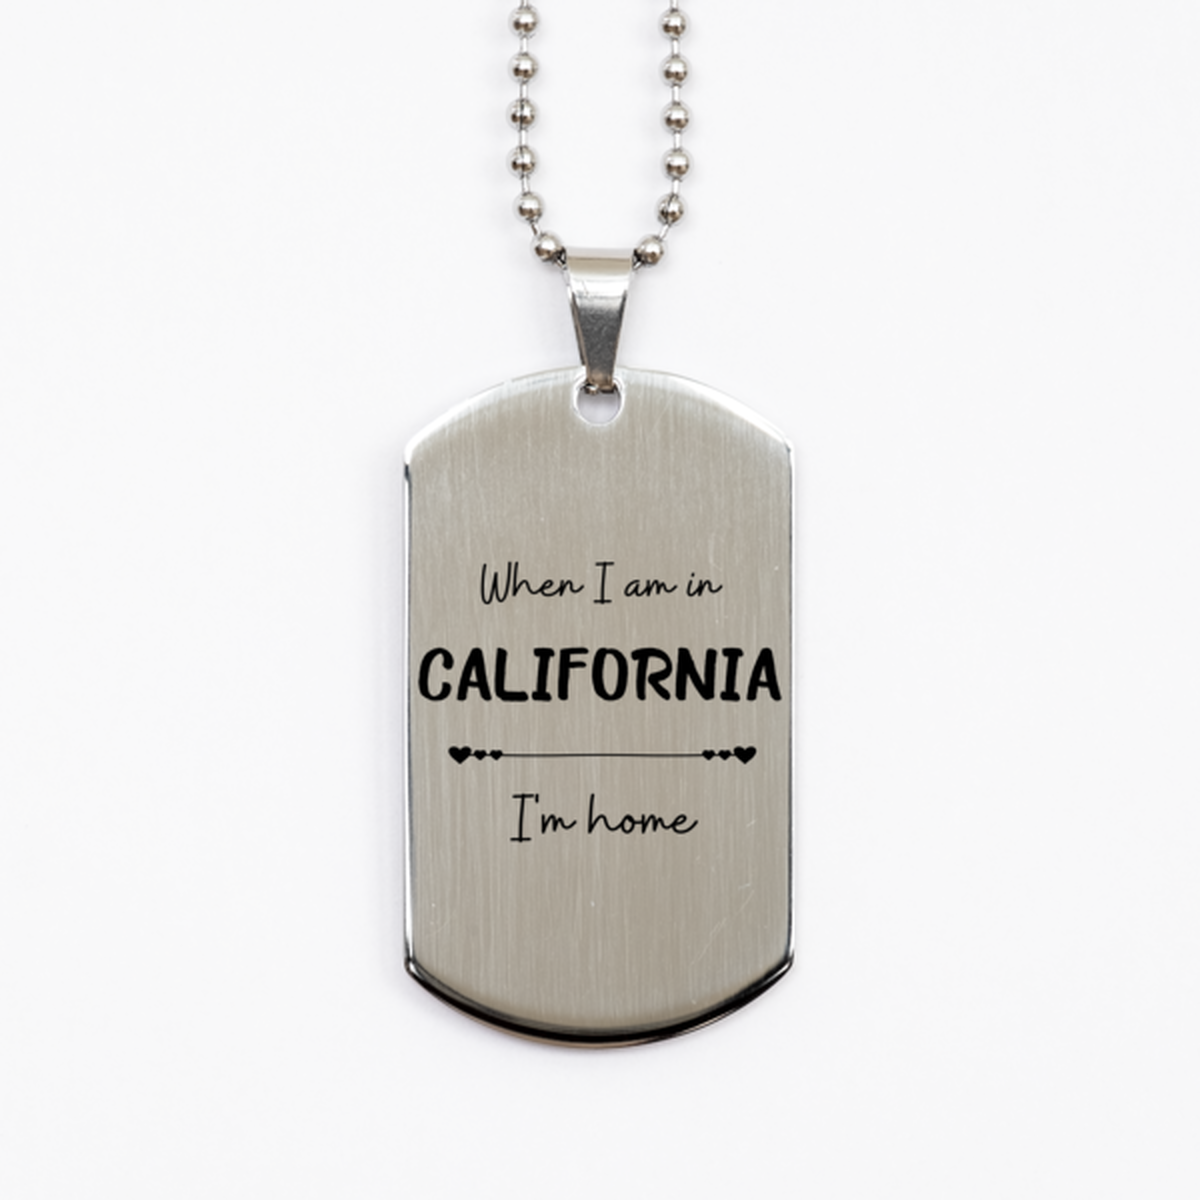 When I am in California I'm home Silver Dog Tag, Cheap Gifts For California, State California Birthday Gifts for Friends Coworker